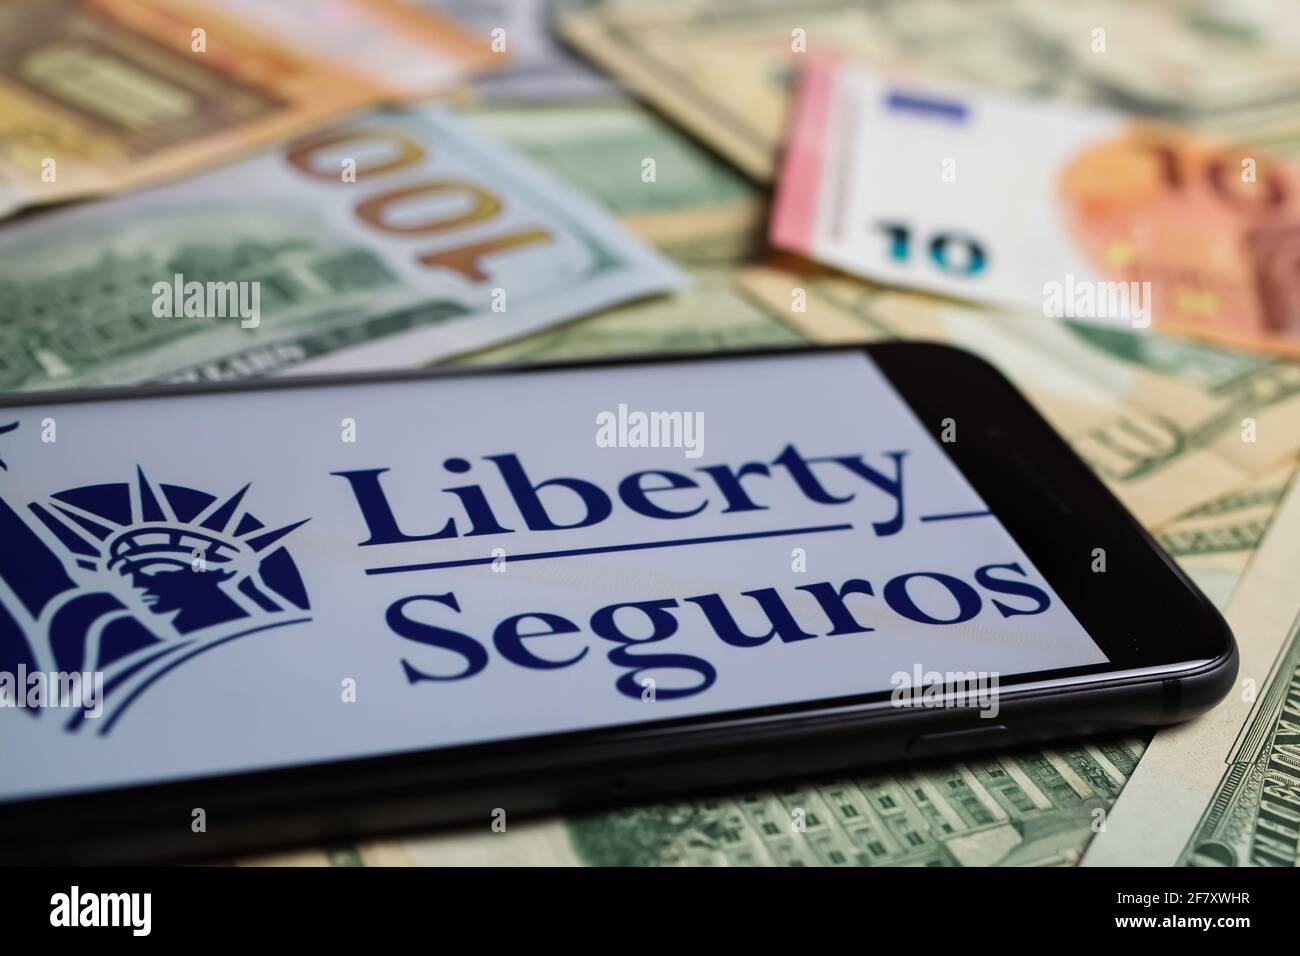 Viersen, Germany - March 1. 2021: Closeup of smartphone with logo lettering of liberty seguros insurance company on paper money currency Stock Photo